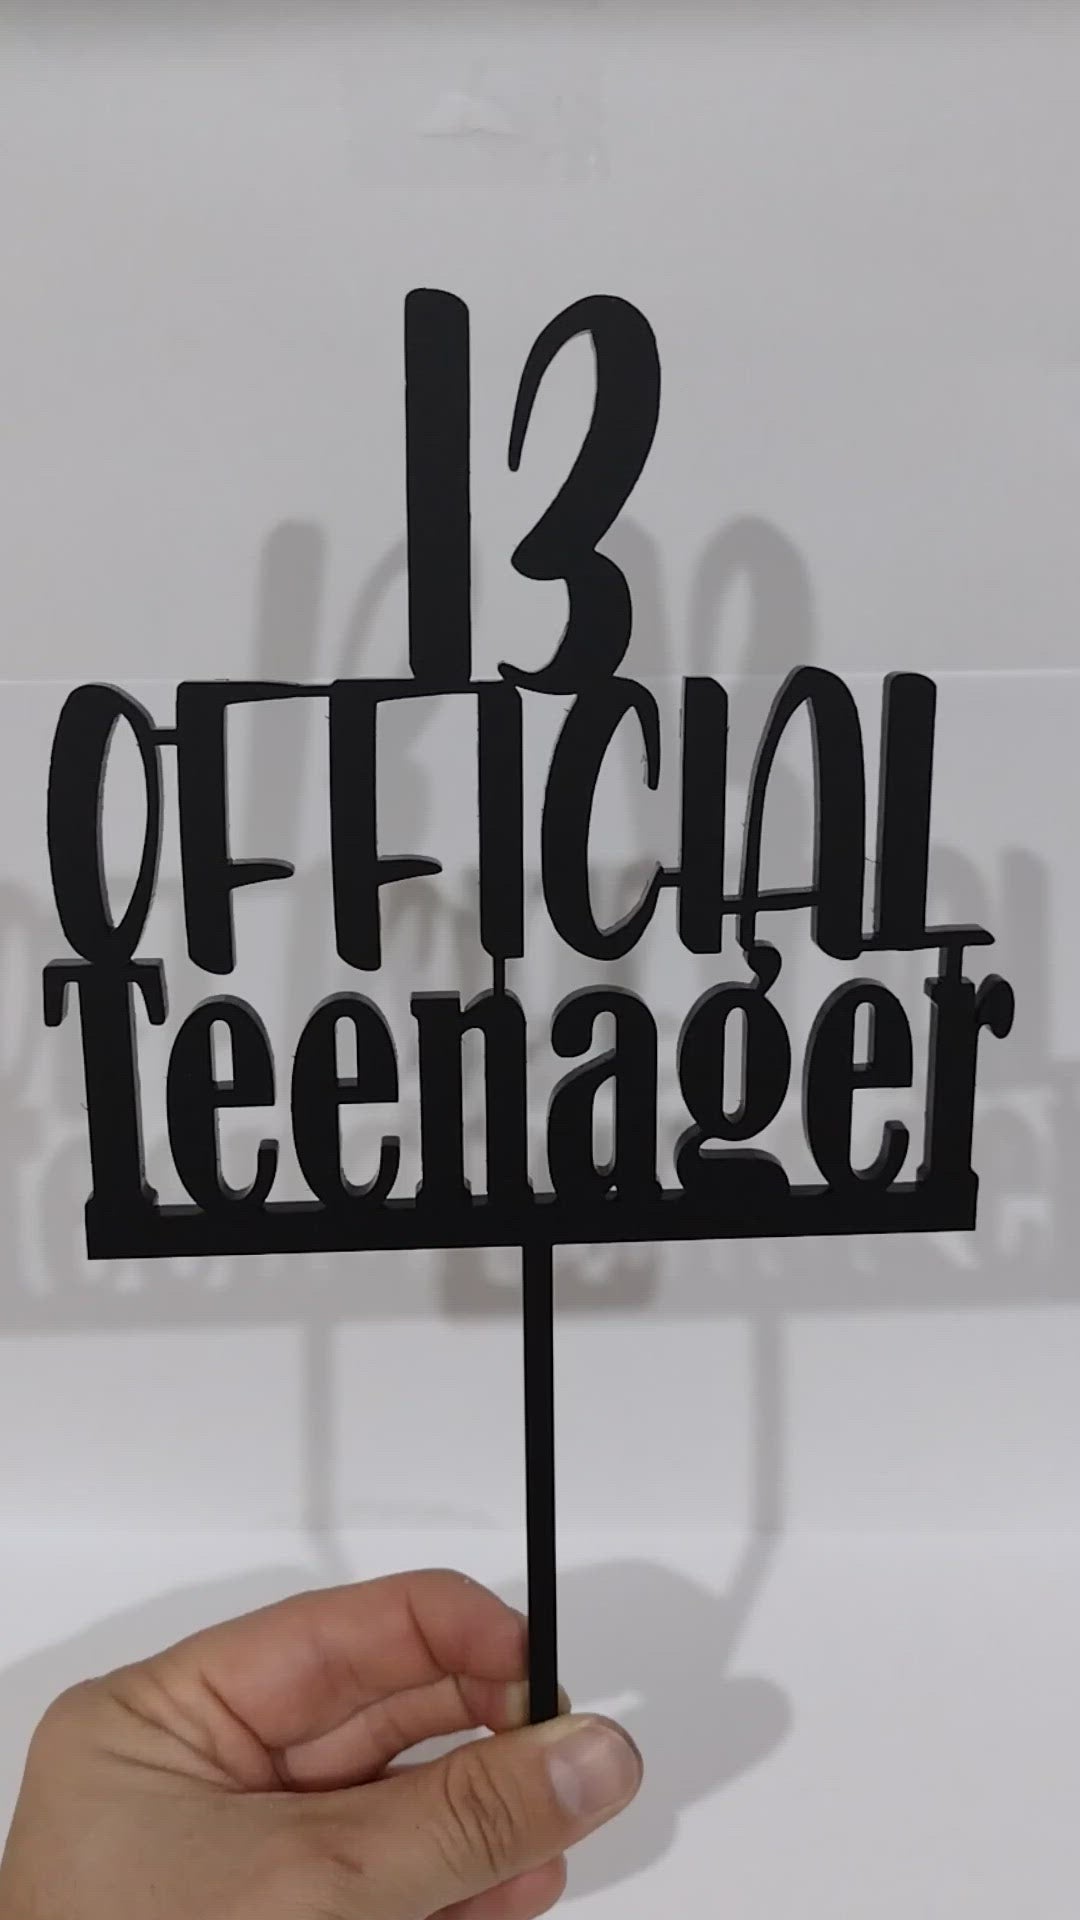 13 Official Teenager  Cake Topper